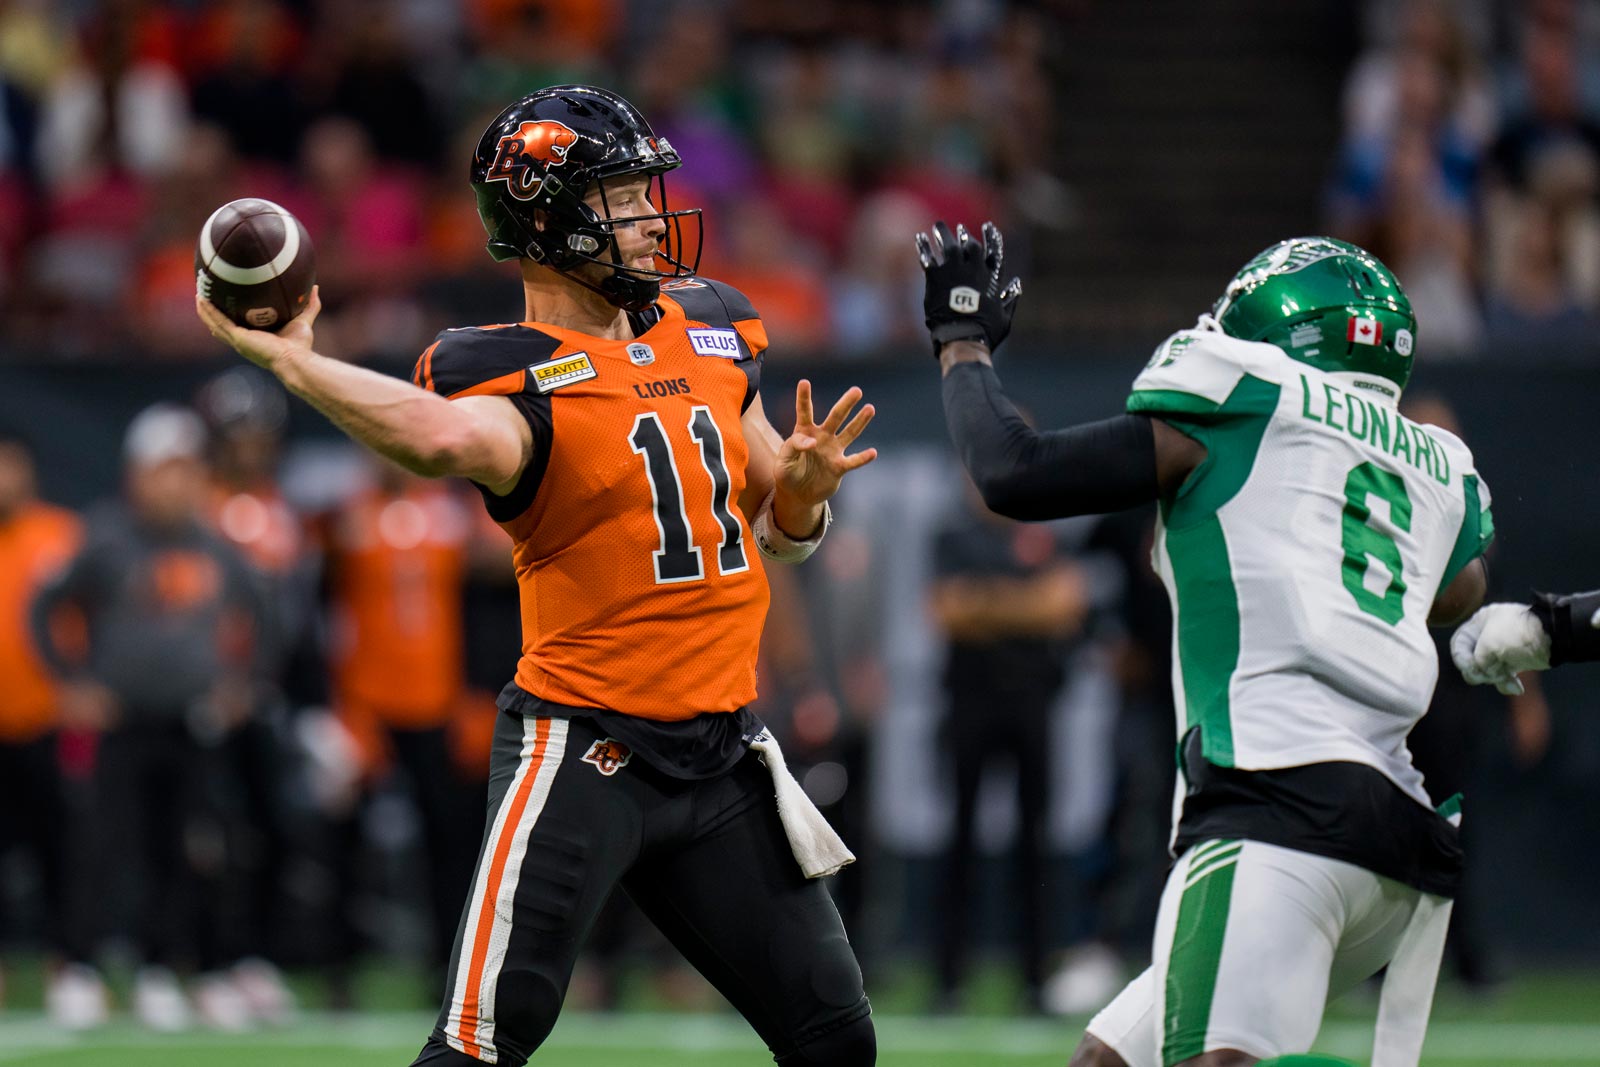 cfl playoff games this weekend